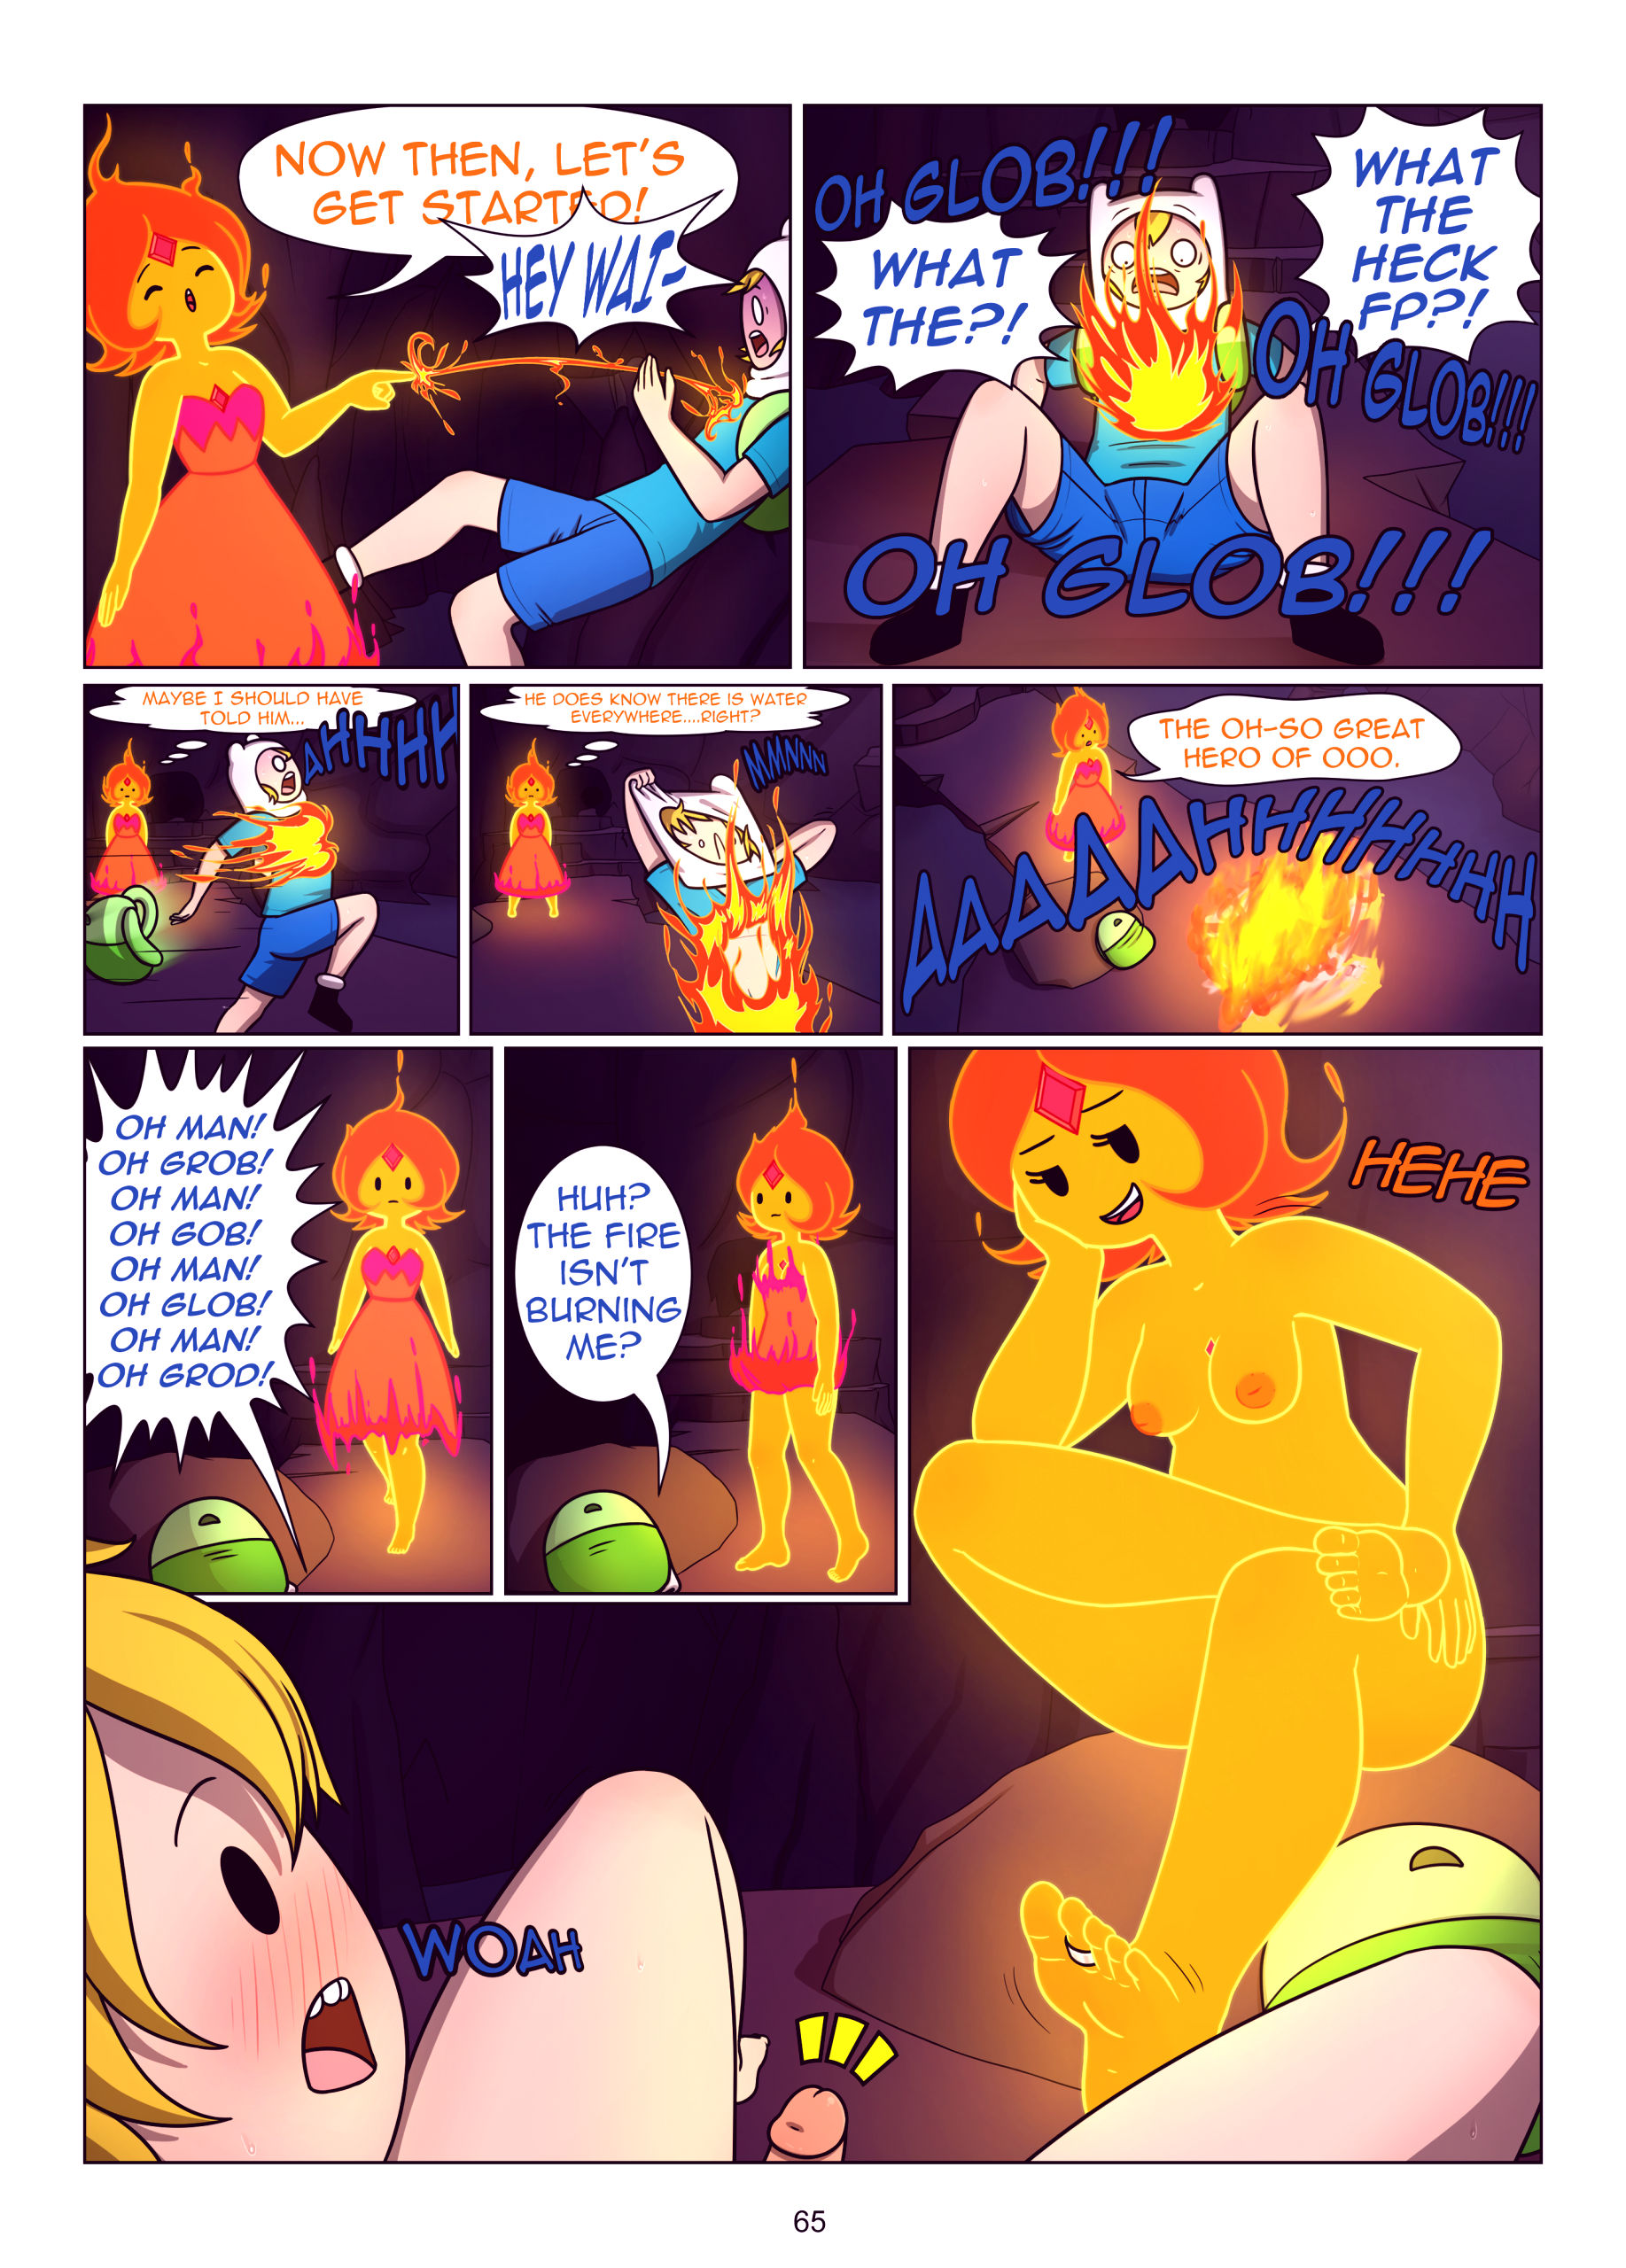 Misadventure time the collection porn comic picture 66